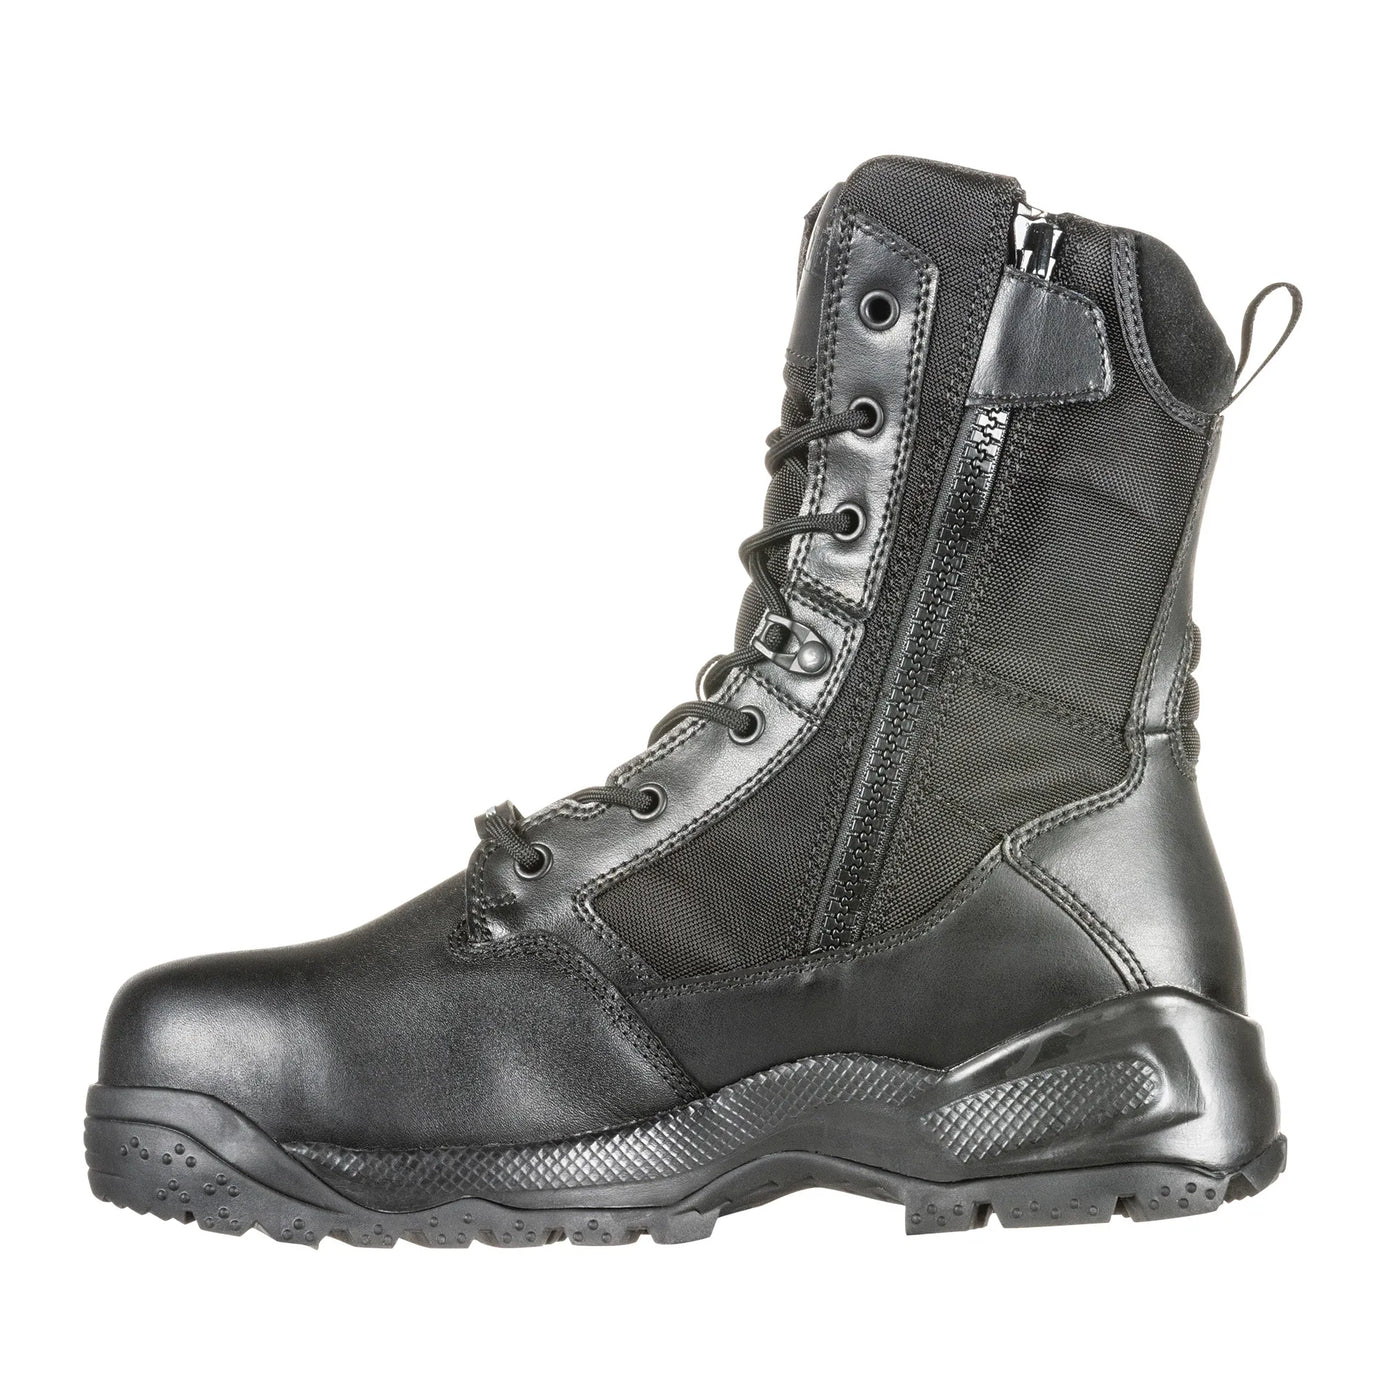 A.T.A.C. 2.0 8” Shield Boot